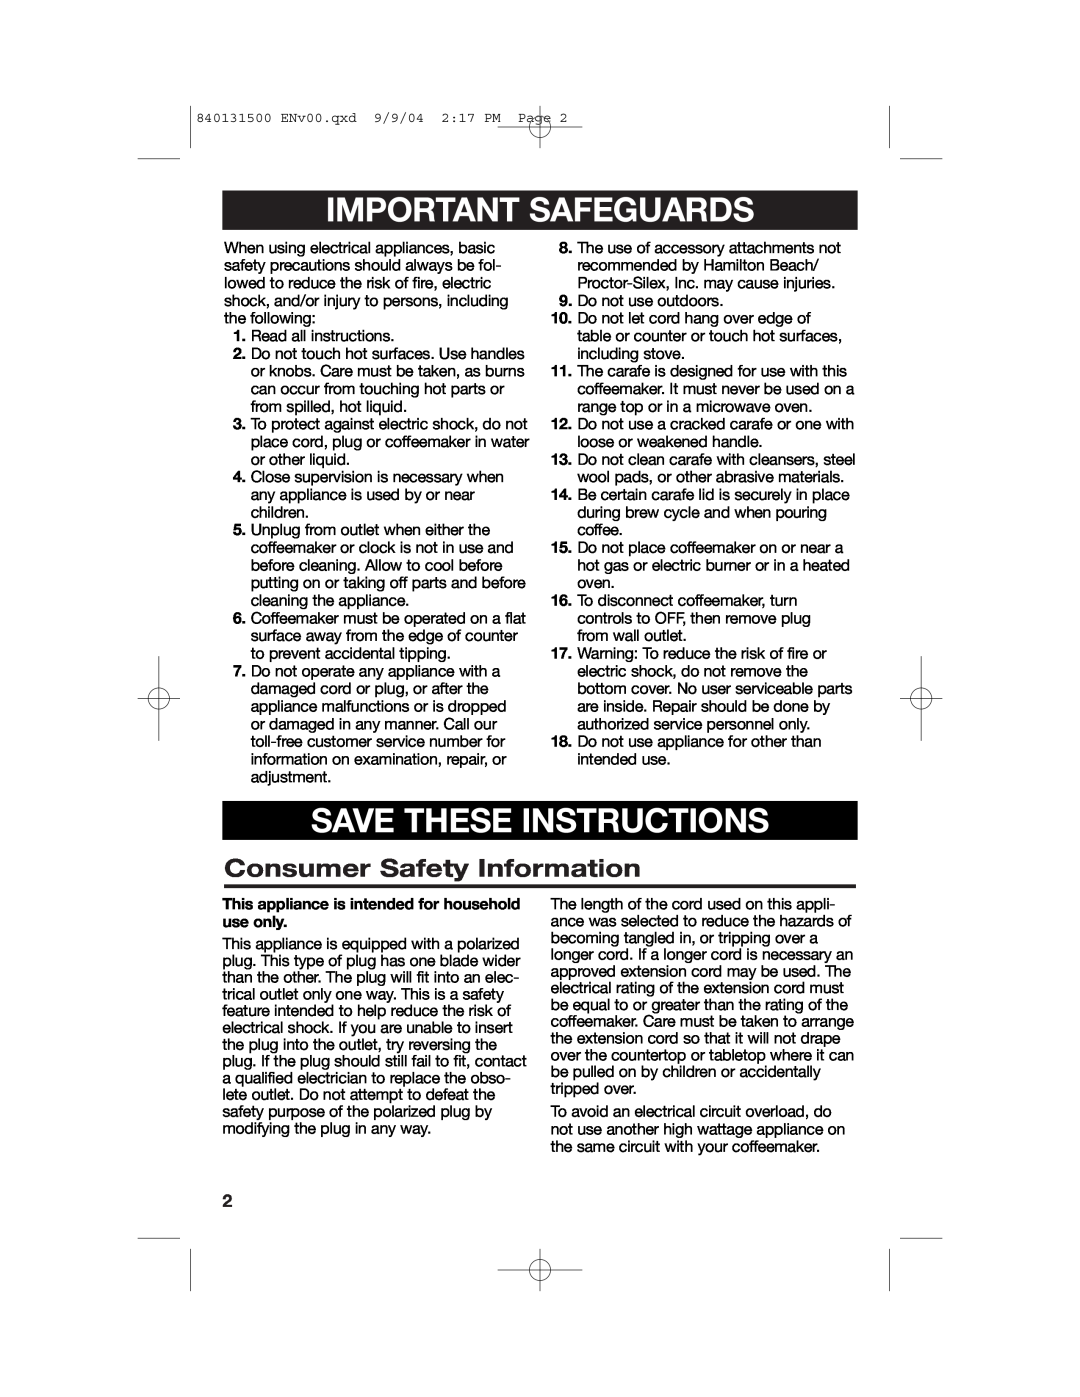 Hamilton Beach 45214, 45114, 45234 manual Important Safeguards, Save These Instructions, Consumer Safety Information 